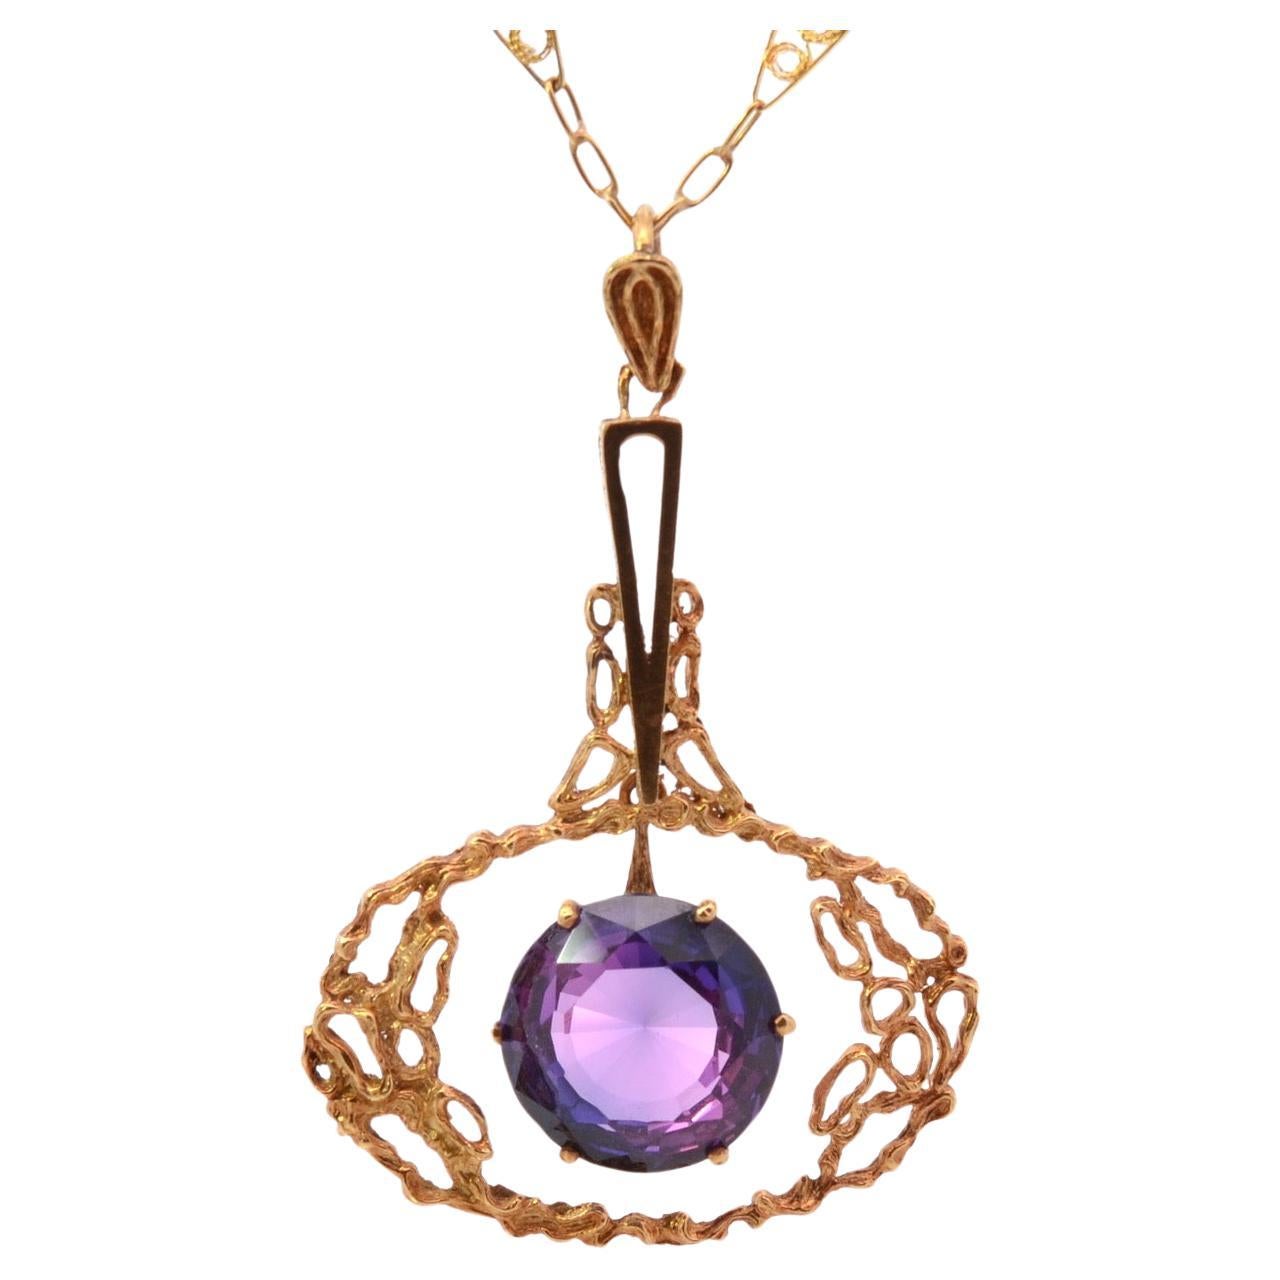 19th century amethyst pendant necklace in 18k gold